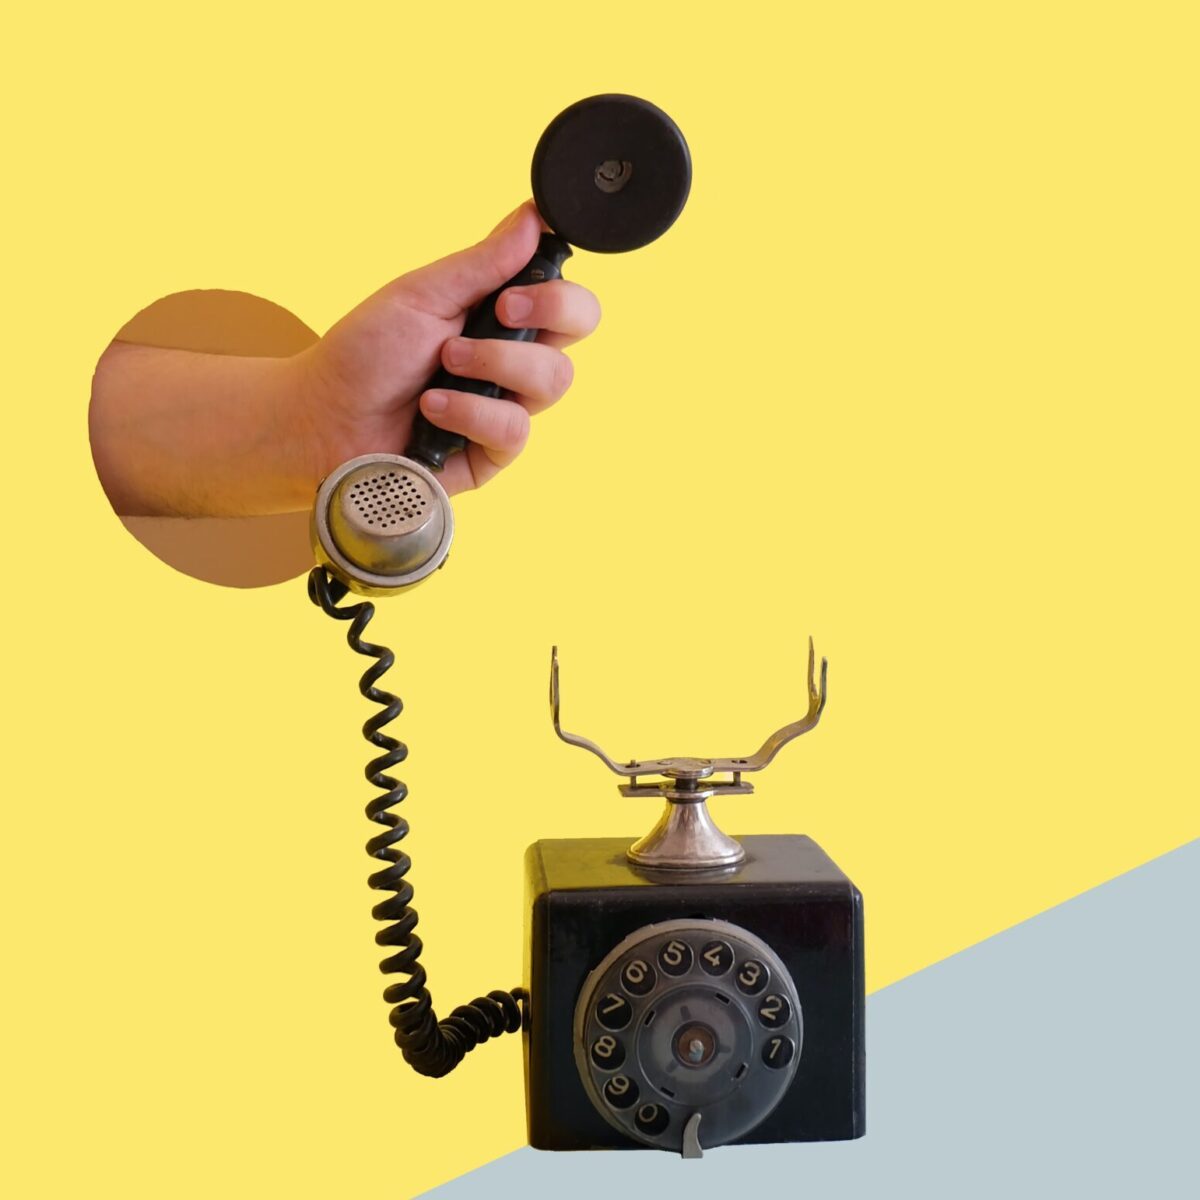 Hand coming out of a hole in a yellow wall to hold a telephone receiver of a dial-up telephone